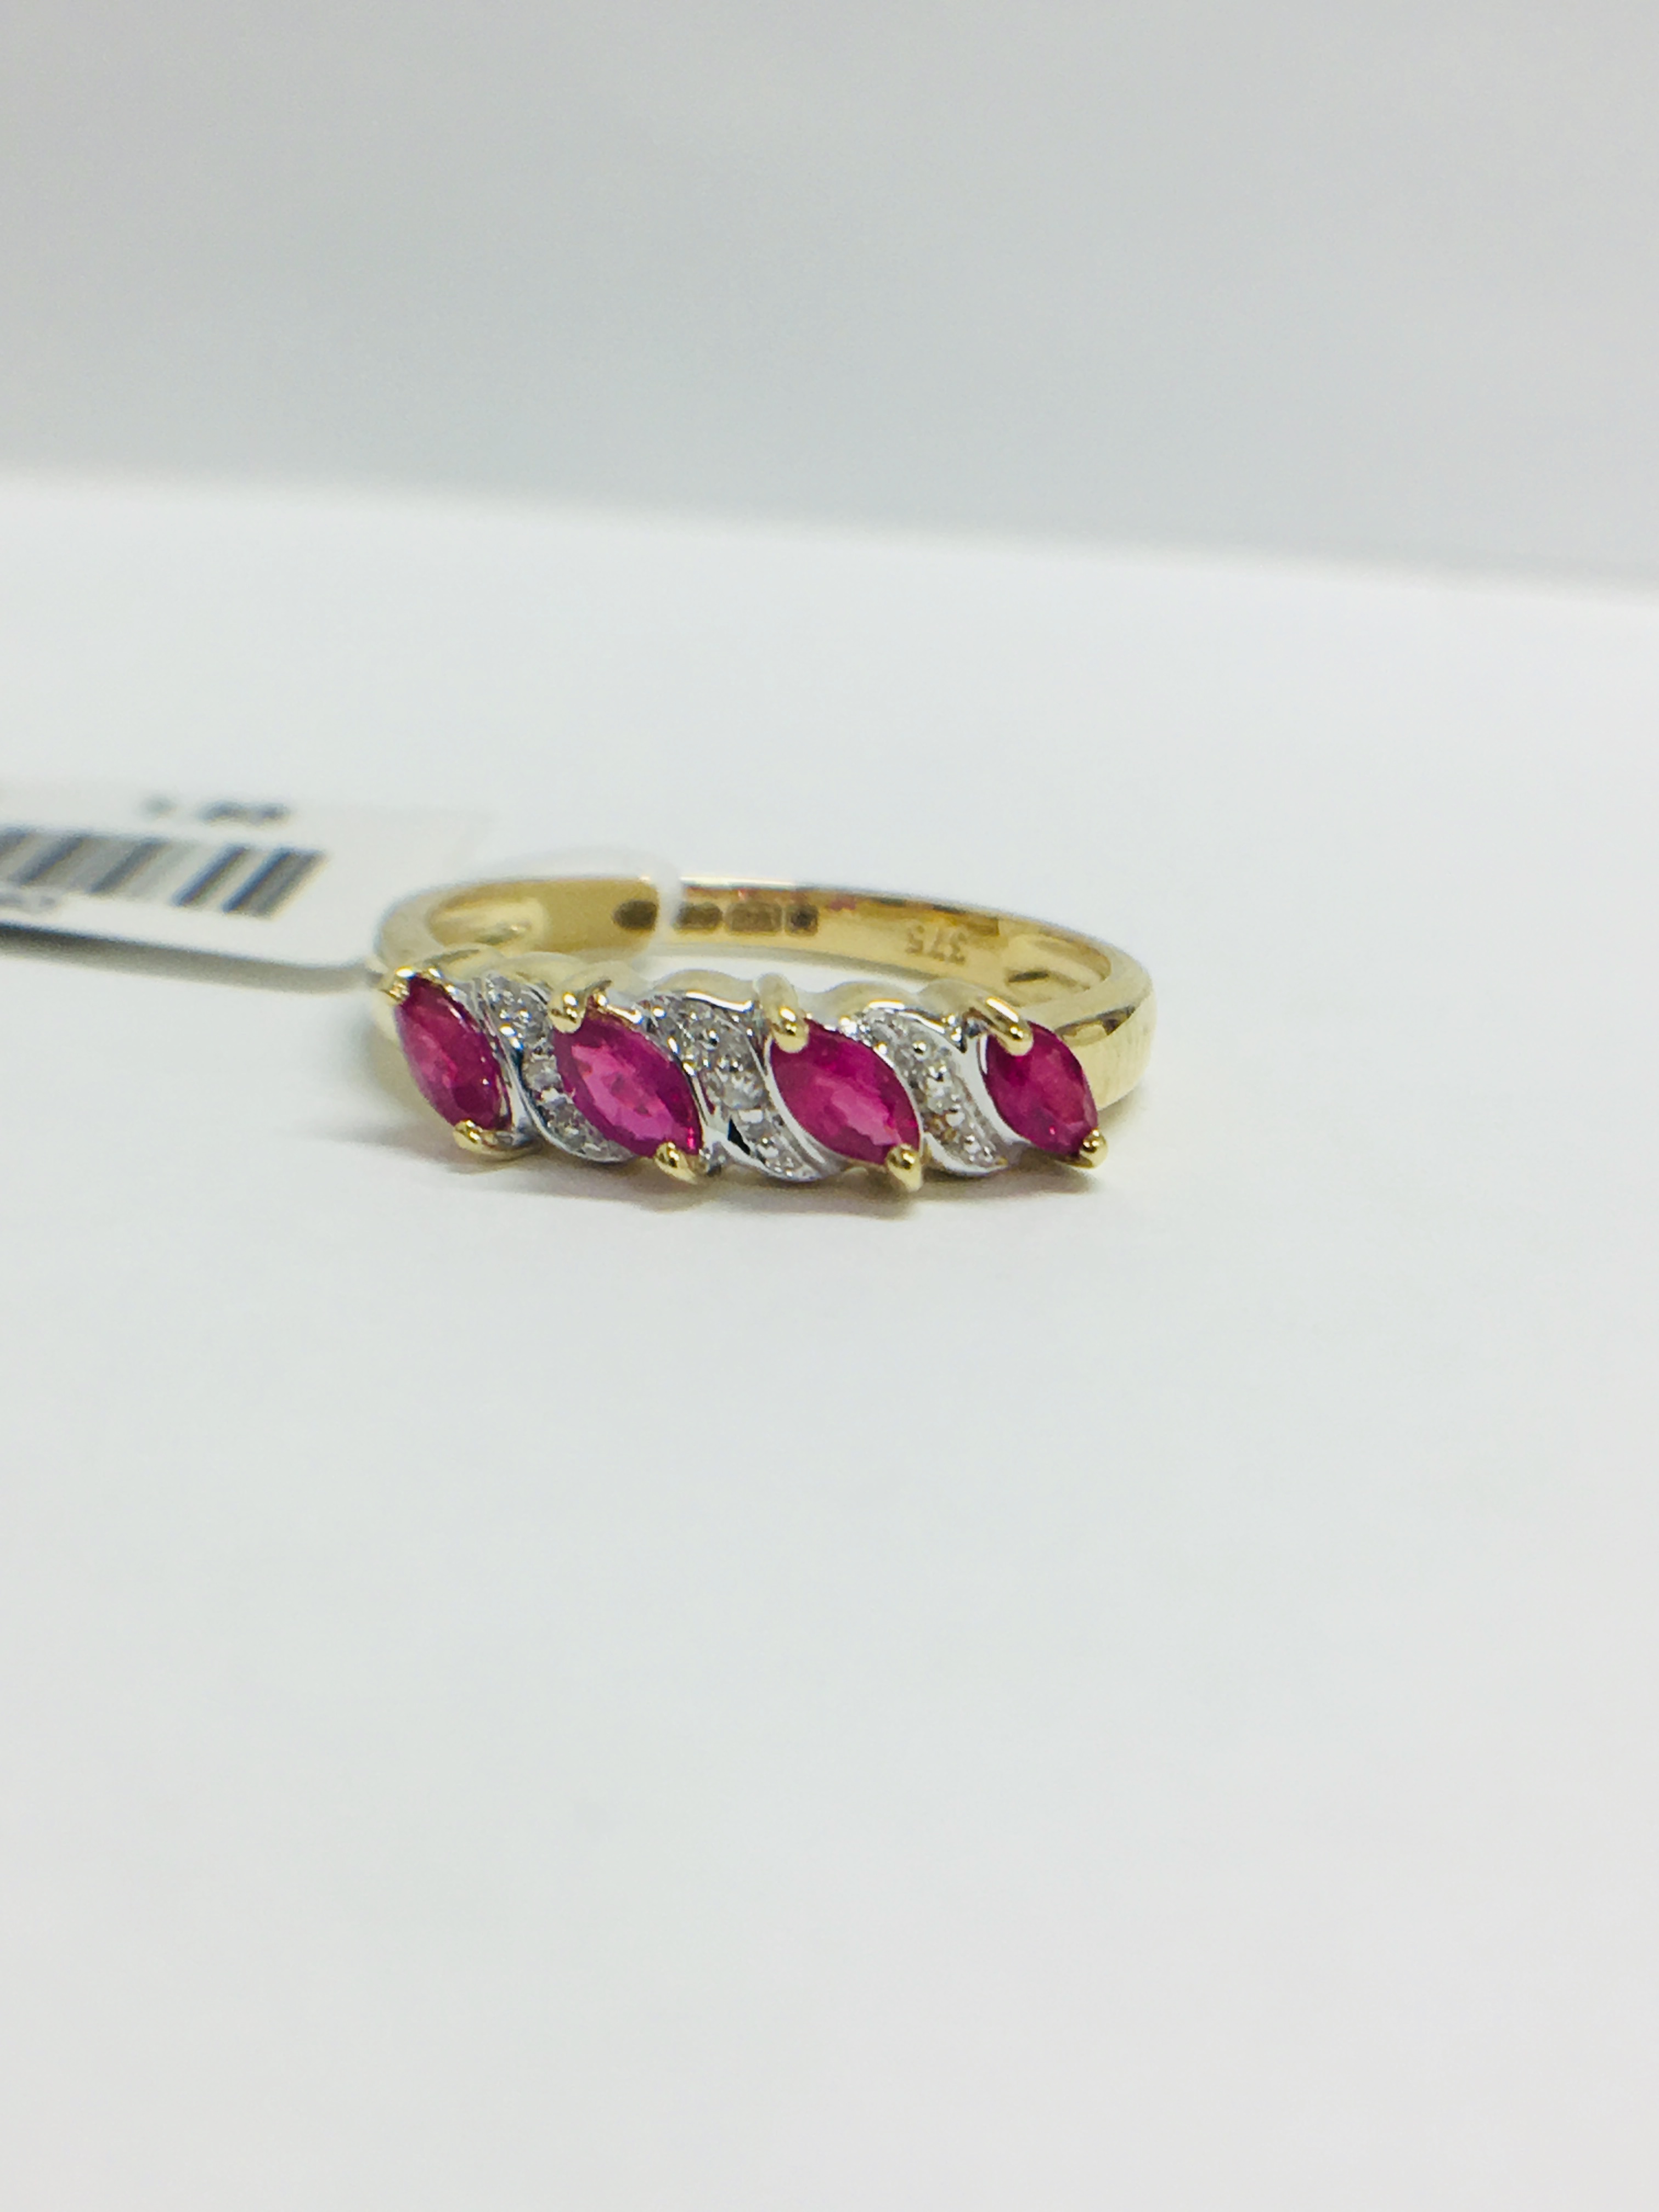 9ct yellow gold Ruby and diamond ring - Image 9 of 10